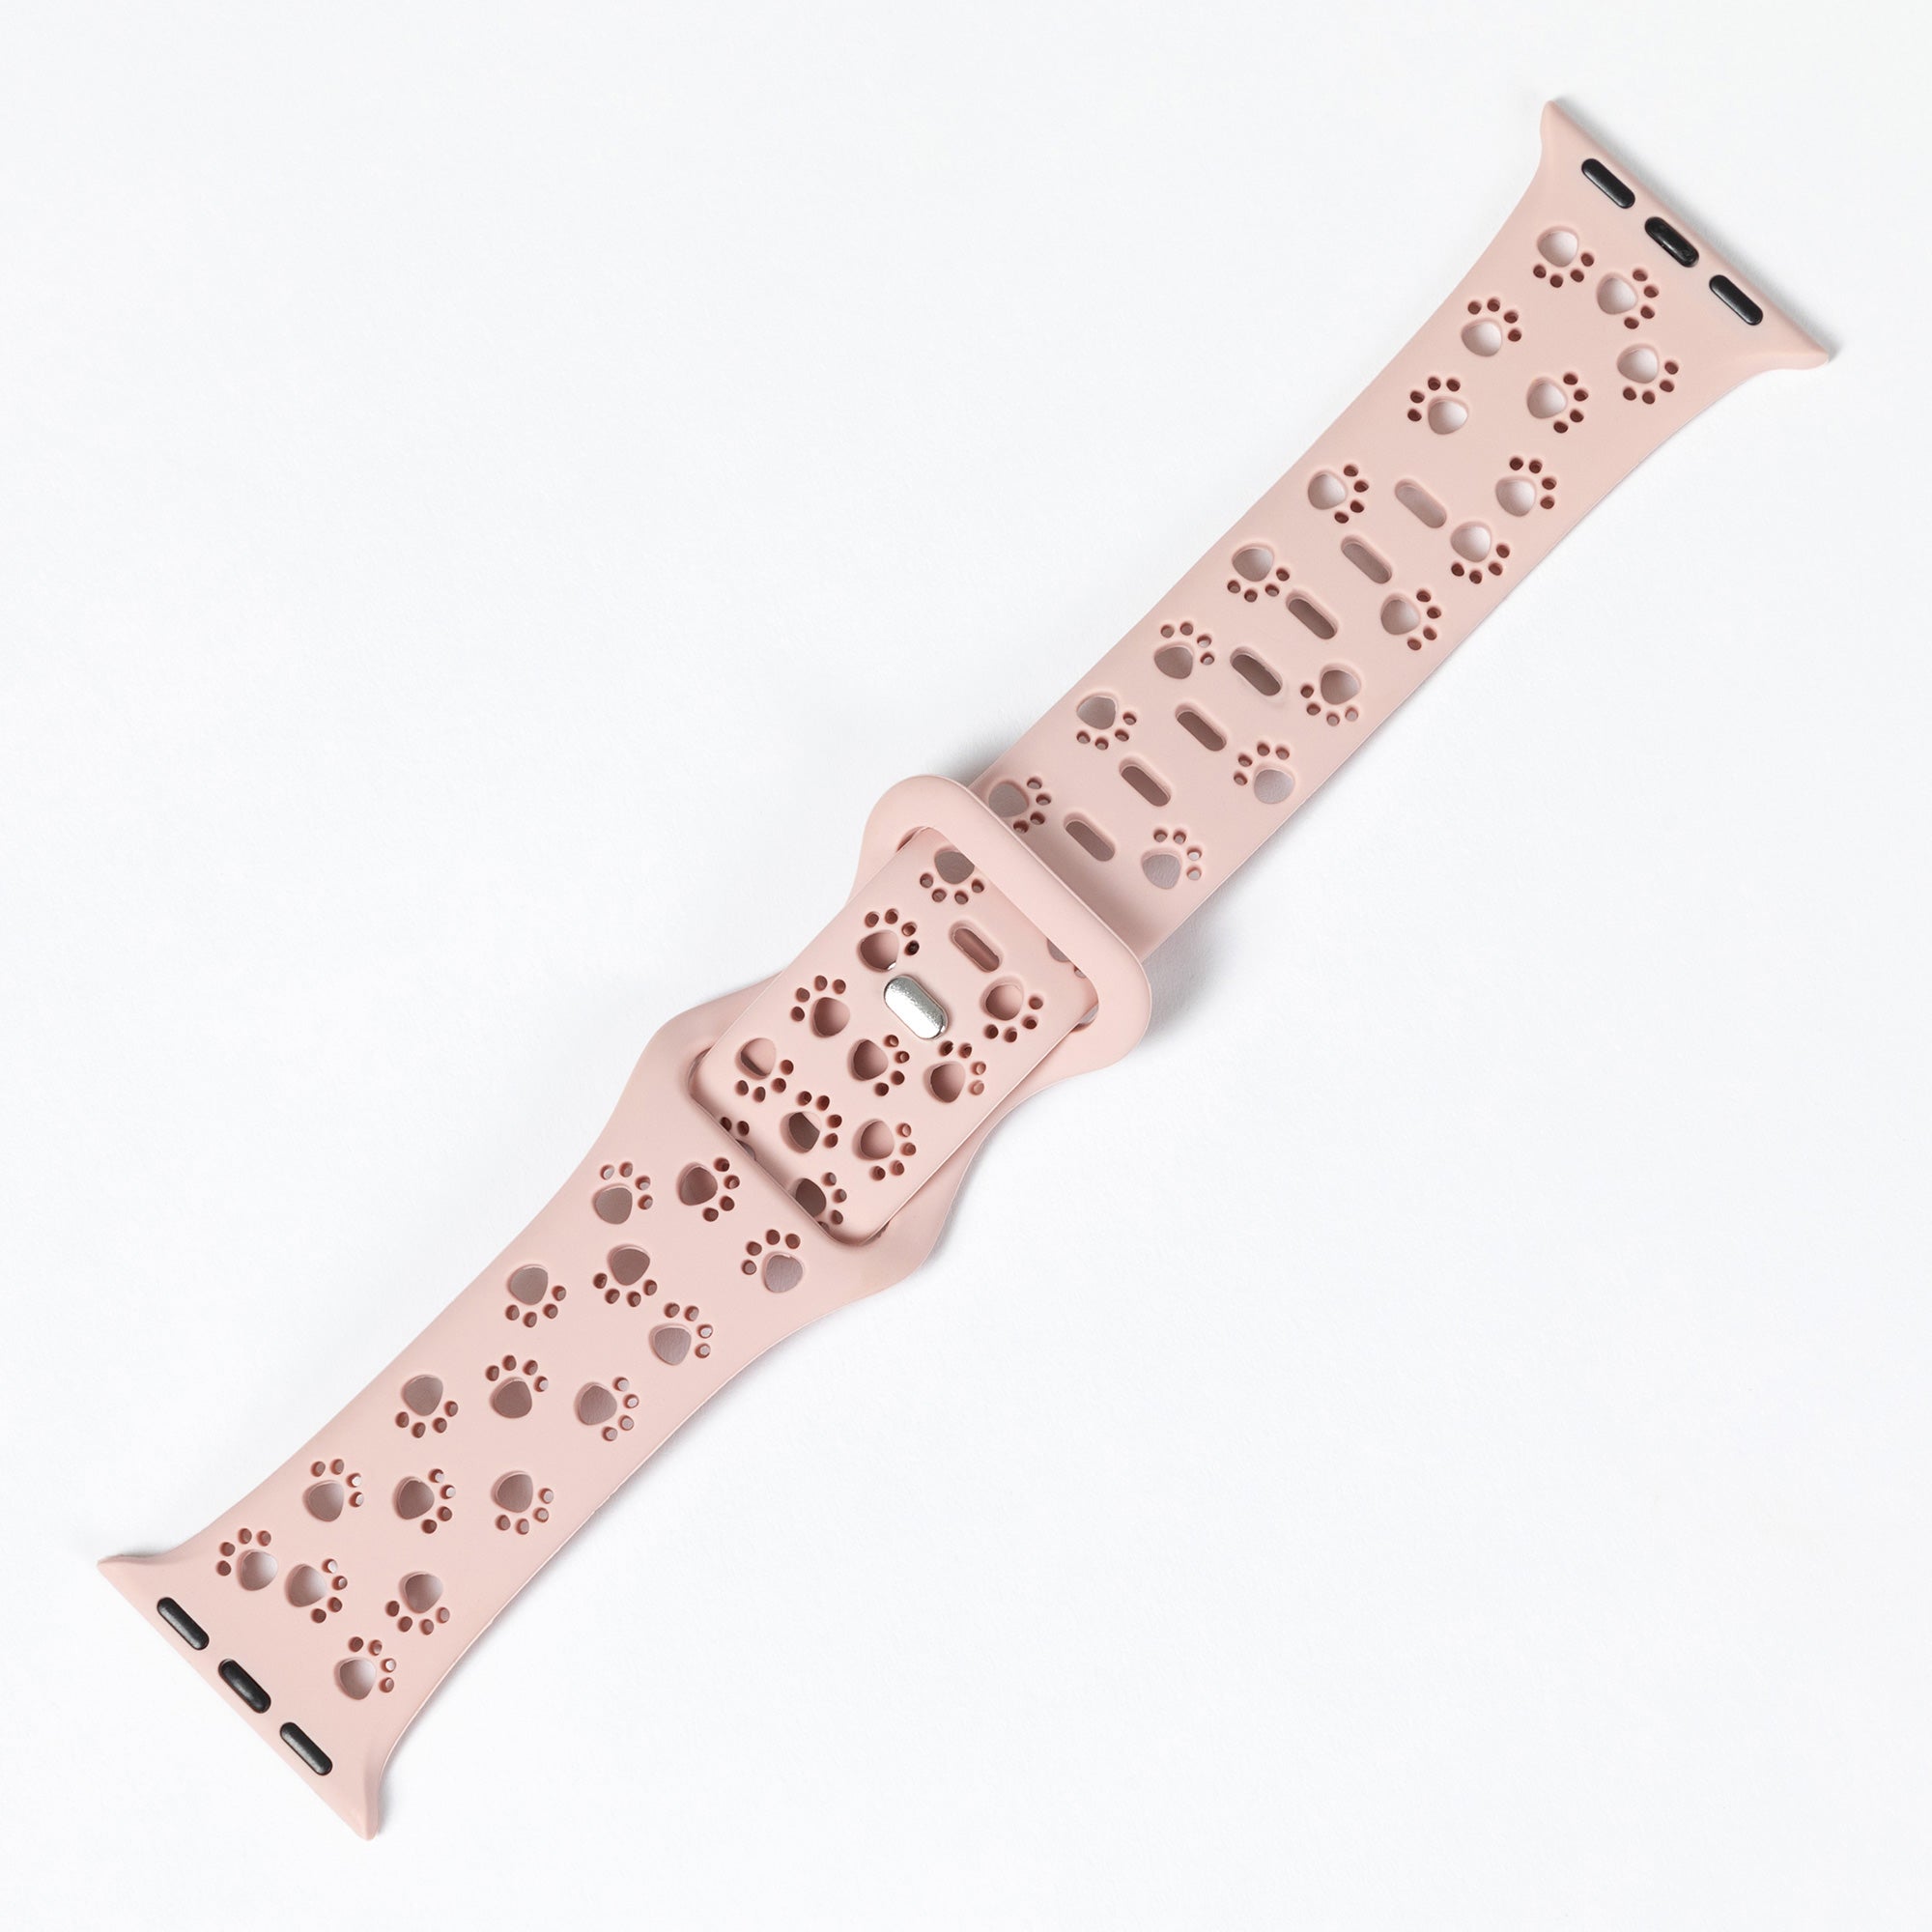 Patterned Silicone Apple Watch Band 38mm/40mm 42mm/44mm - Cut Out Paws - Pink - 38mm/40mm